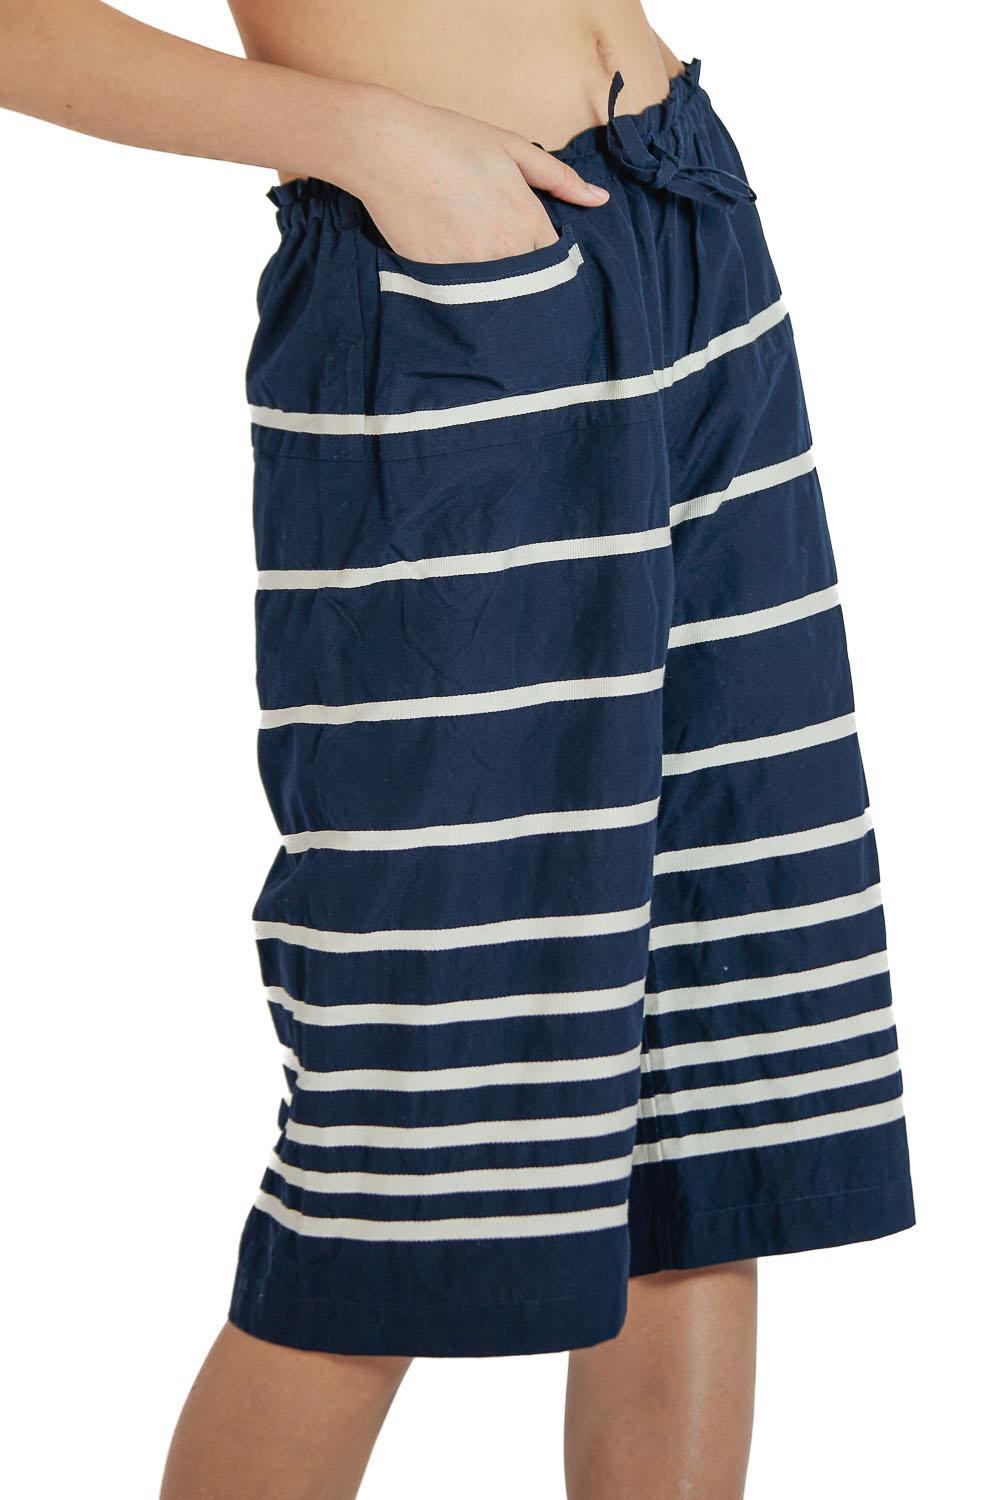 1990S ME BY ISSEY MIYAKE Blue & White  Cotton Blend Nautical Striped Drawstring For Sale 4